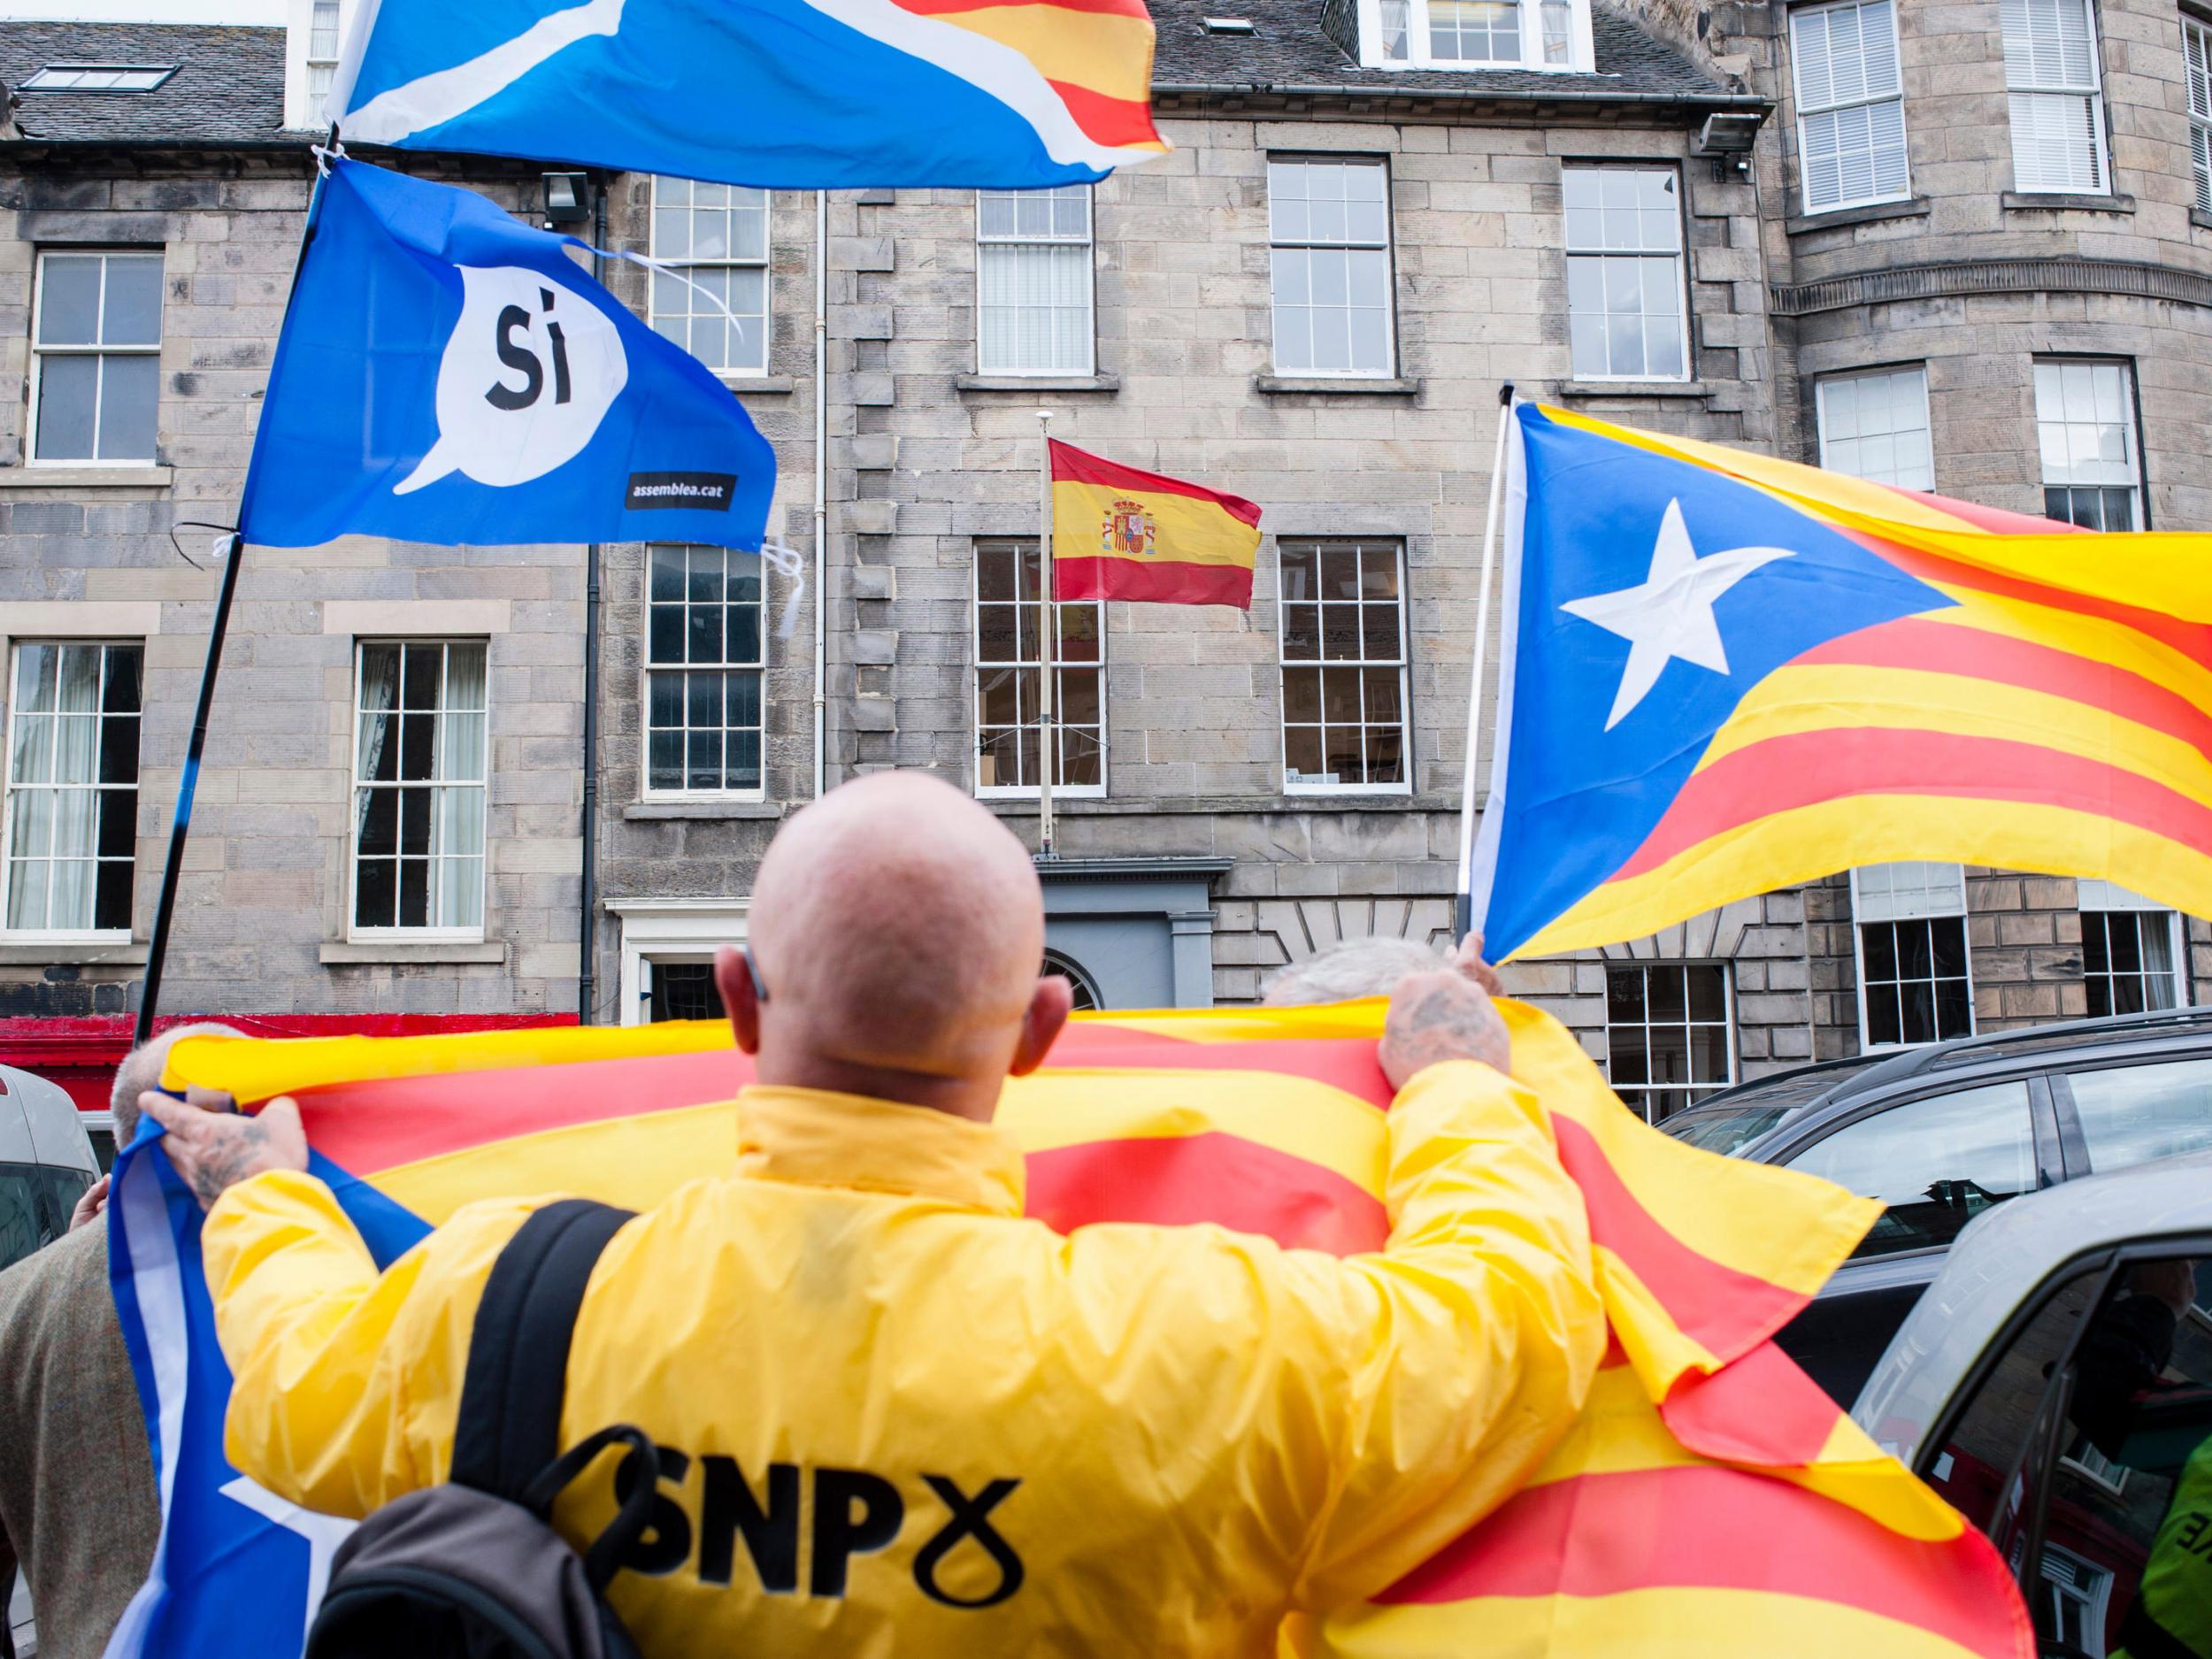 People protest against the actions of the Spanish government in front of the Spanish consulate in Edinburgh. Spanish police stormed ministries and buildings belonging to Catalonia's regional government yesterday, in an attempt to try and put a stop to the region's independence referendum